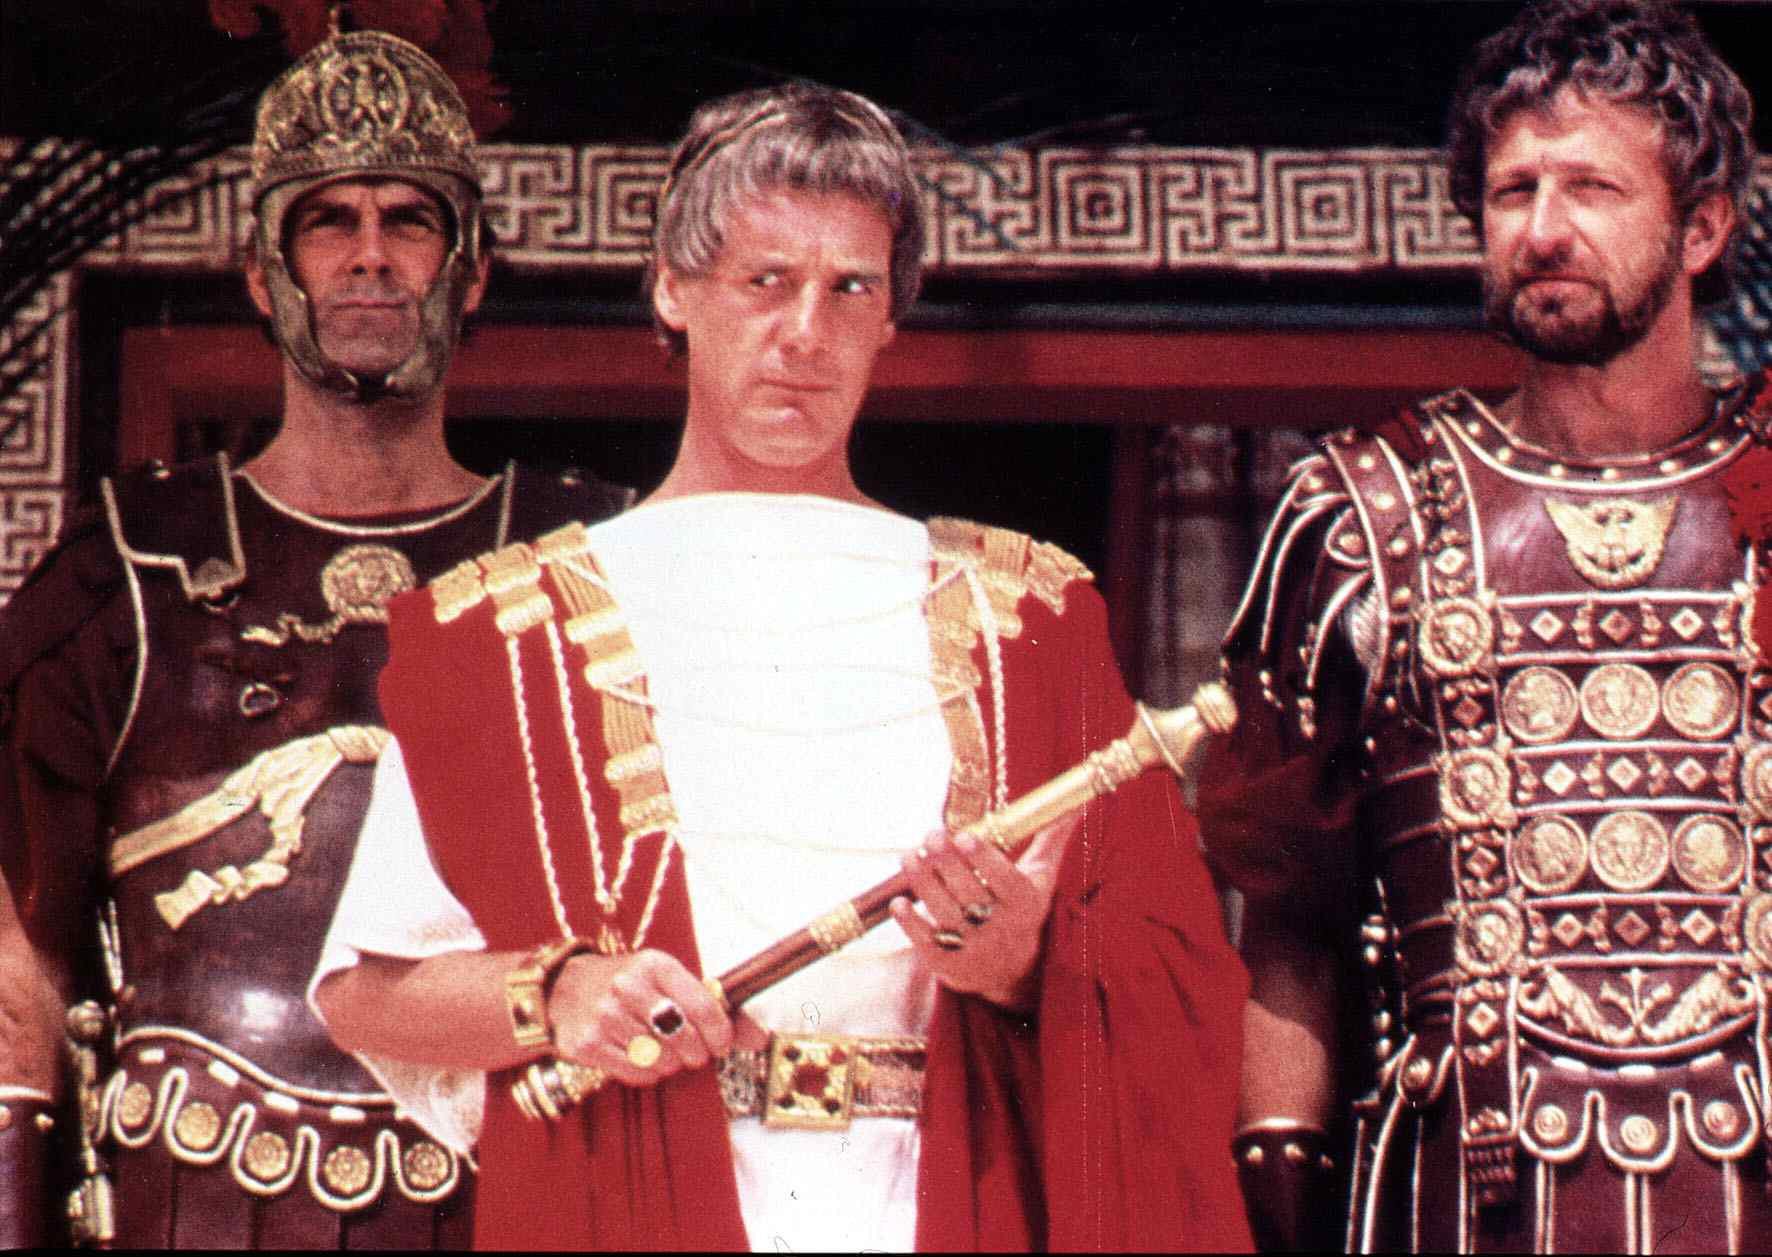 Three characters in Roman attire in a scene from Life of Brian